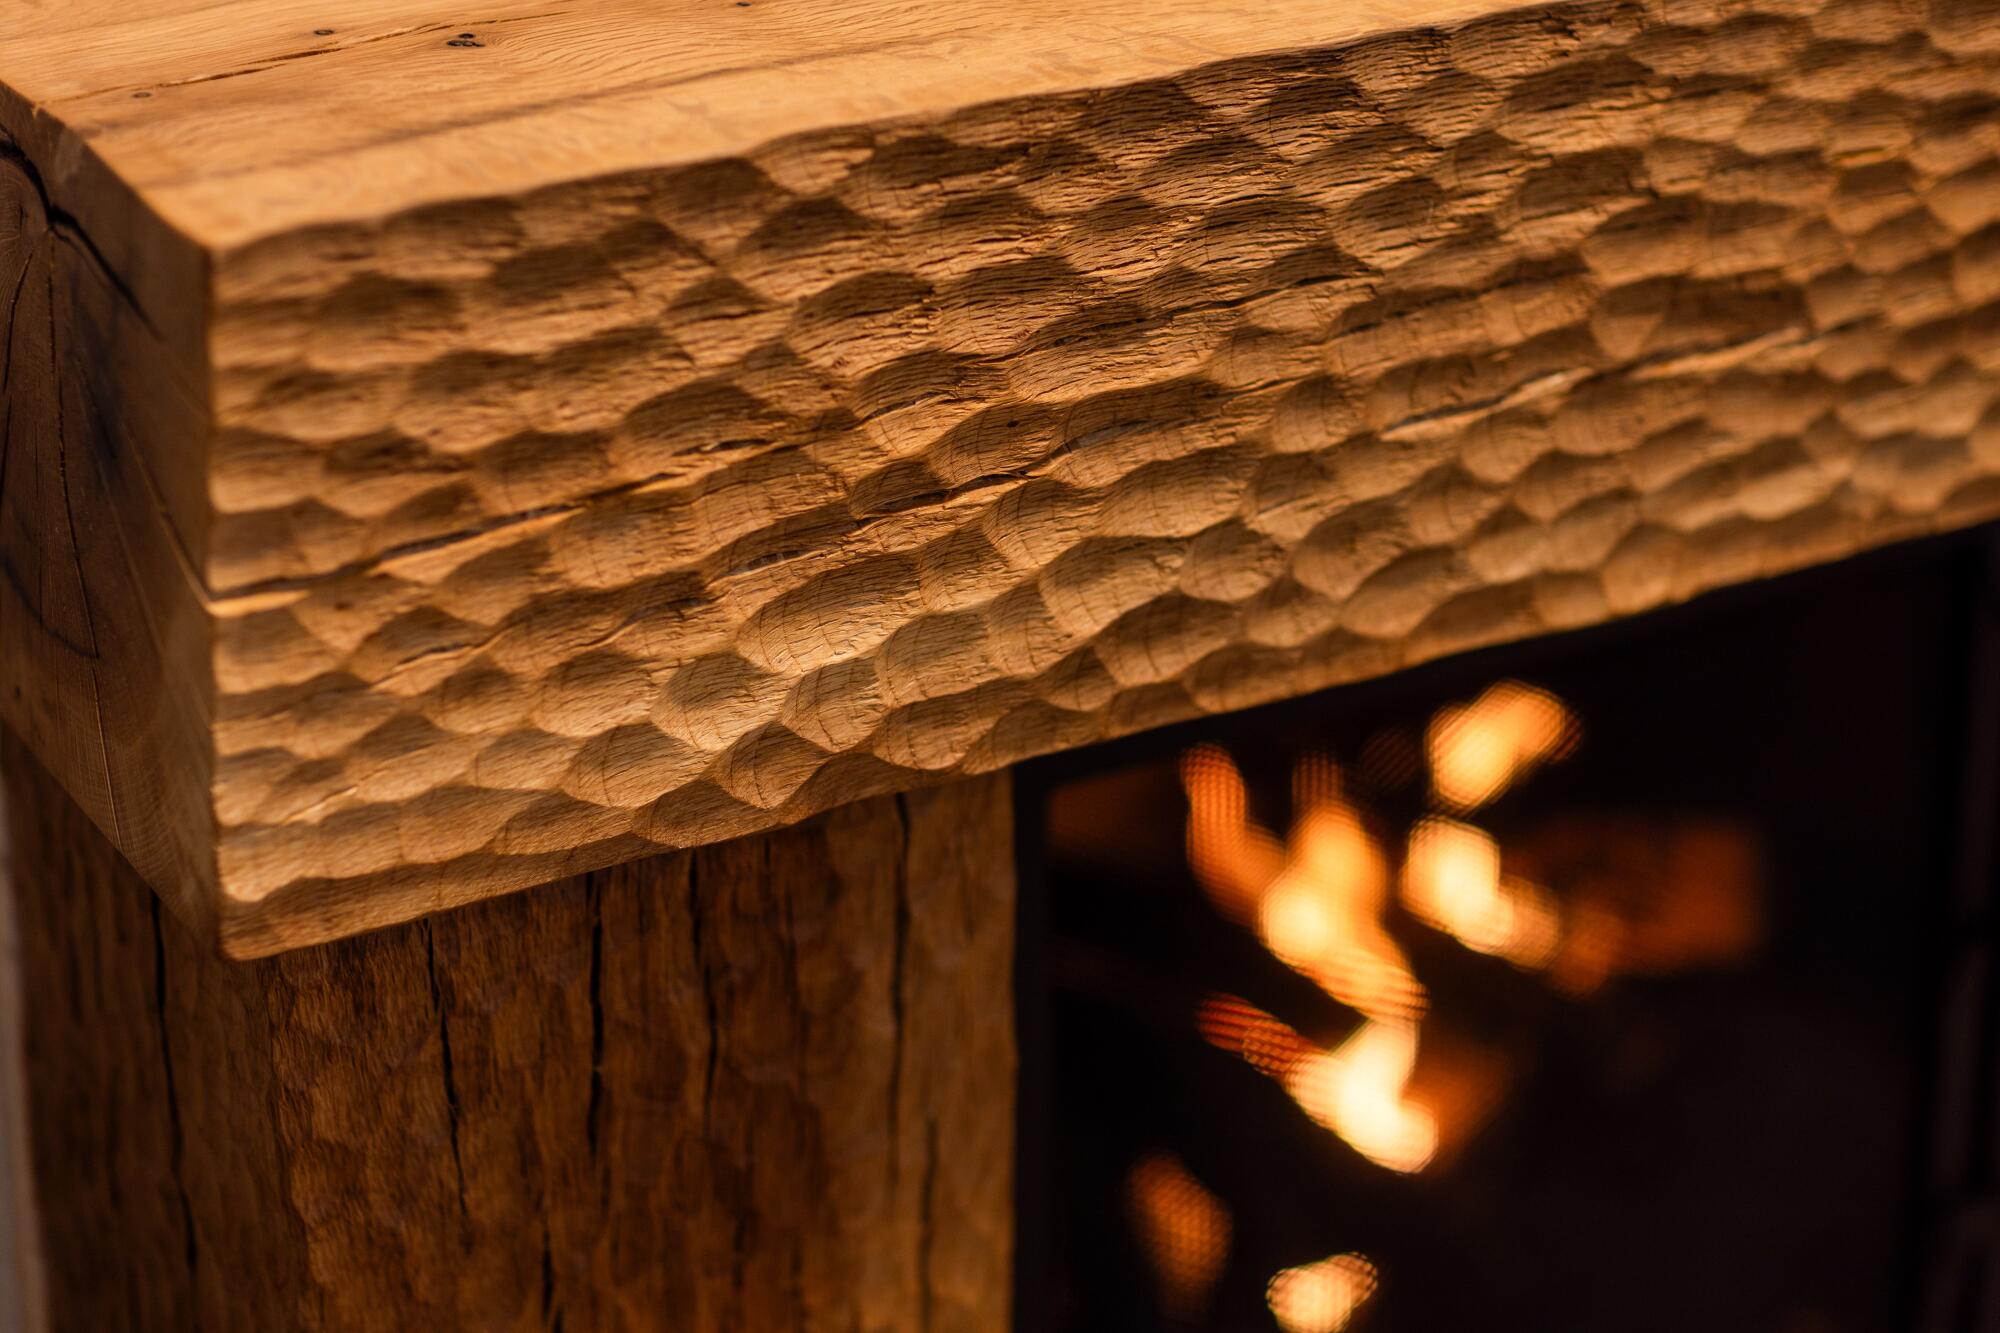 Chisel marks create a pattern on a wood fireplace mantel